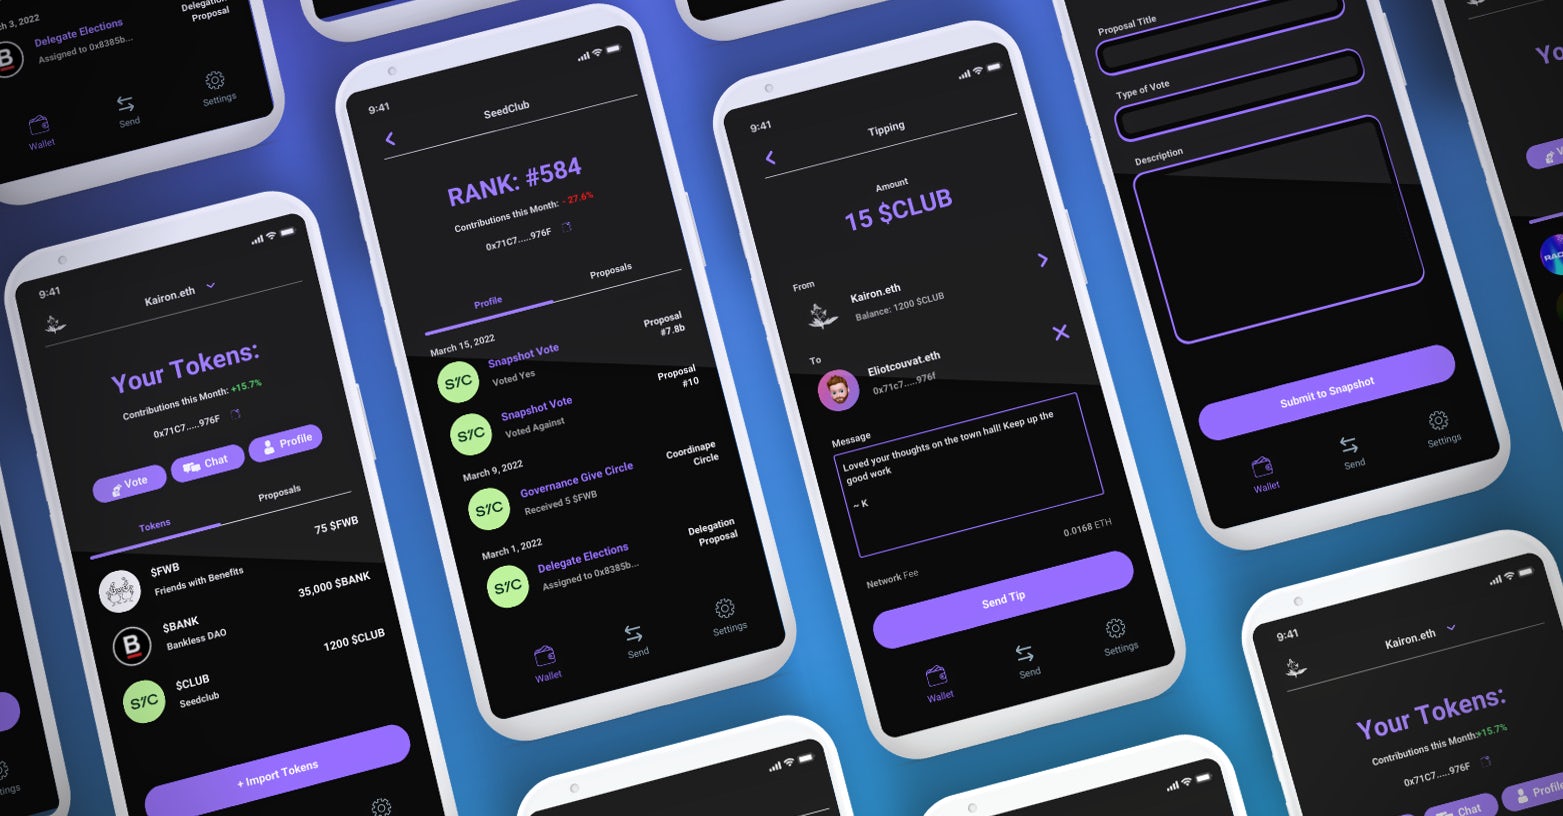 Mock-ups of what such an app could look like